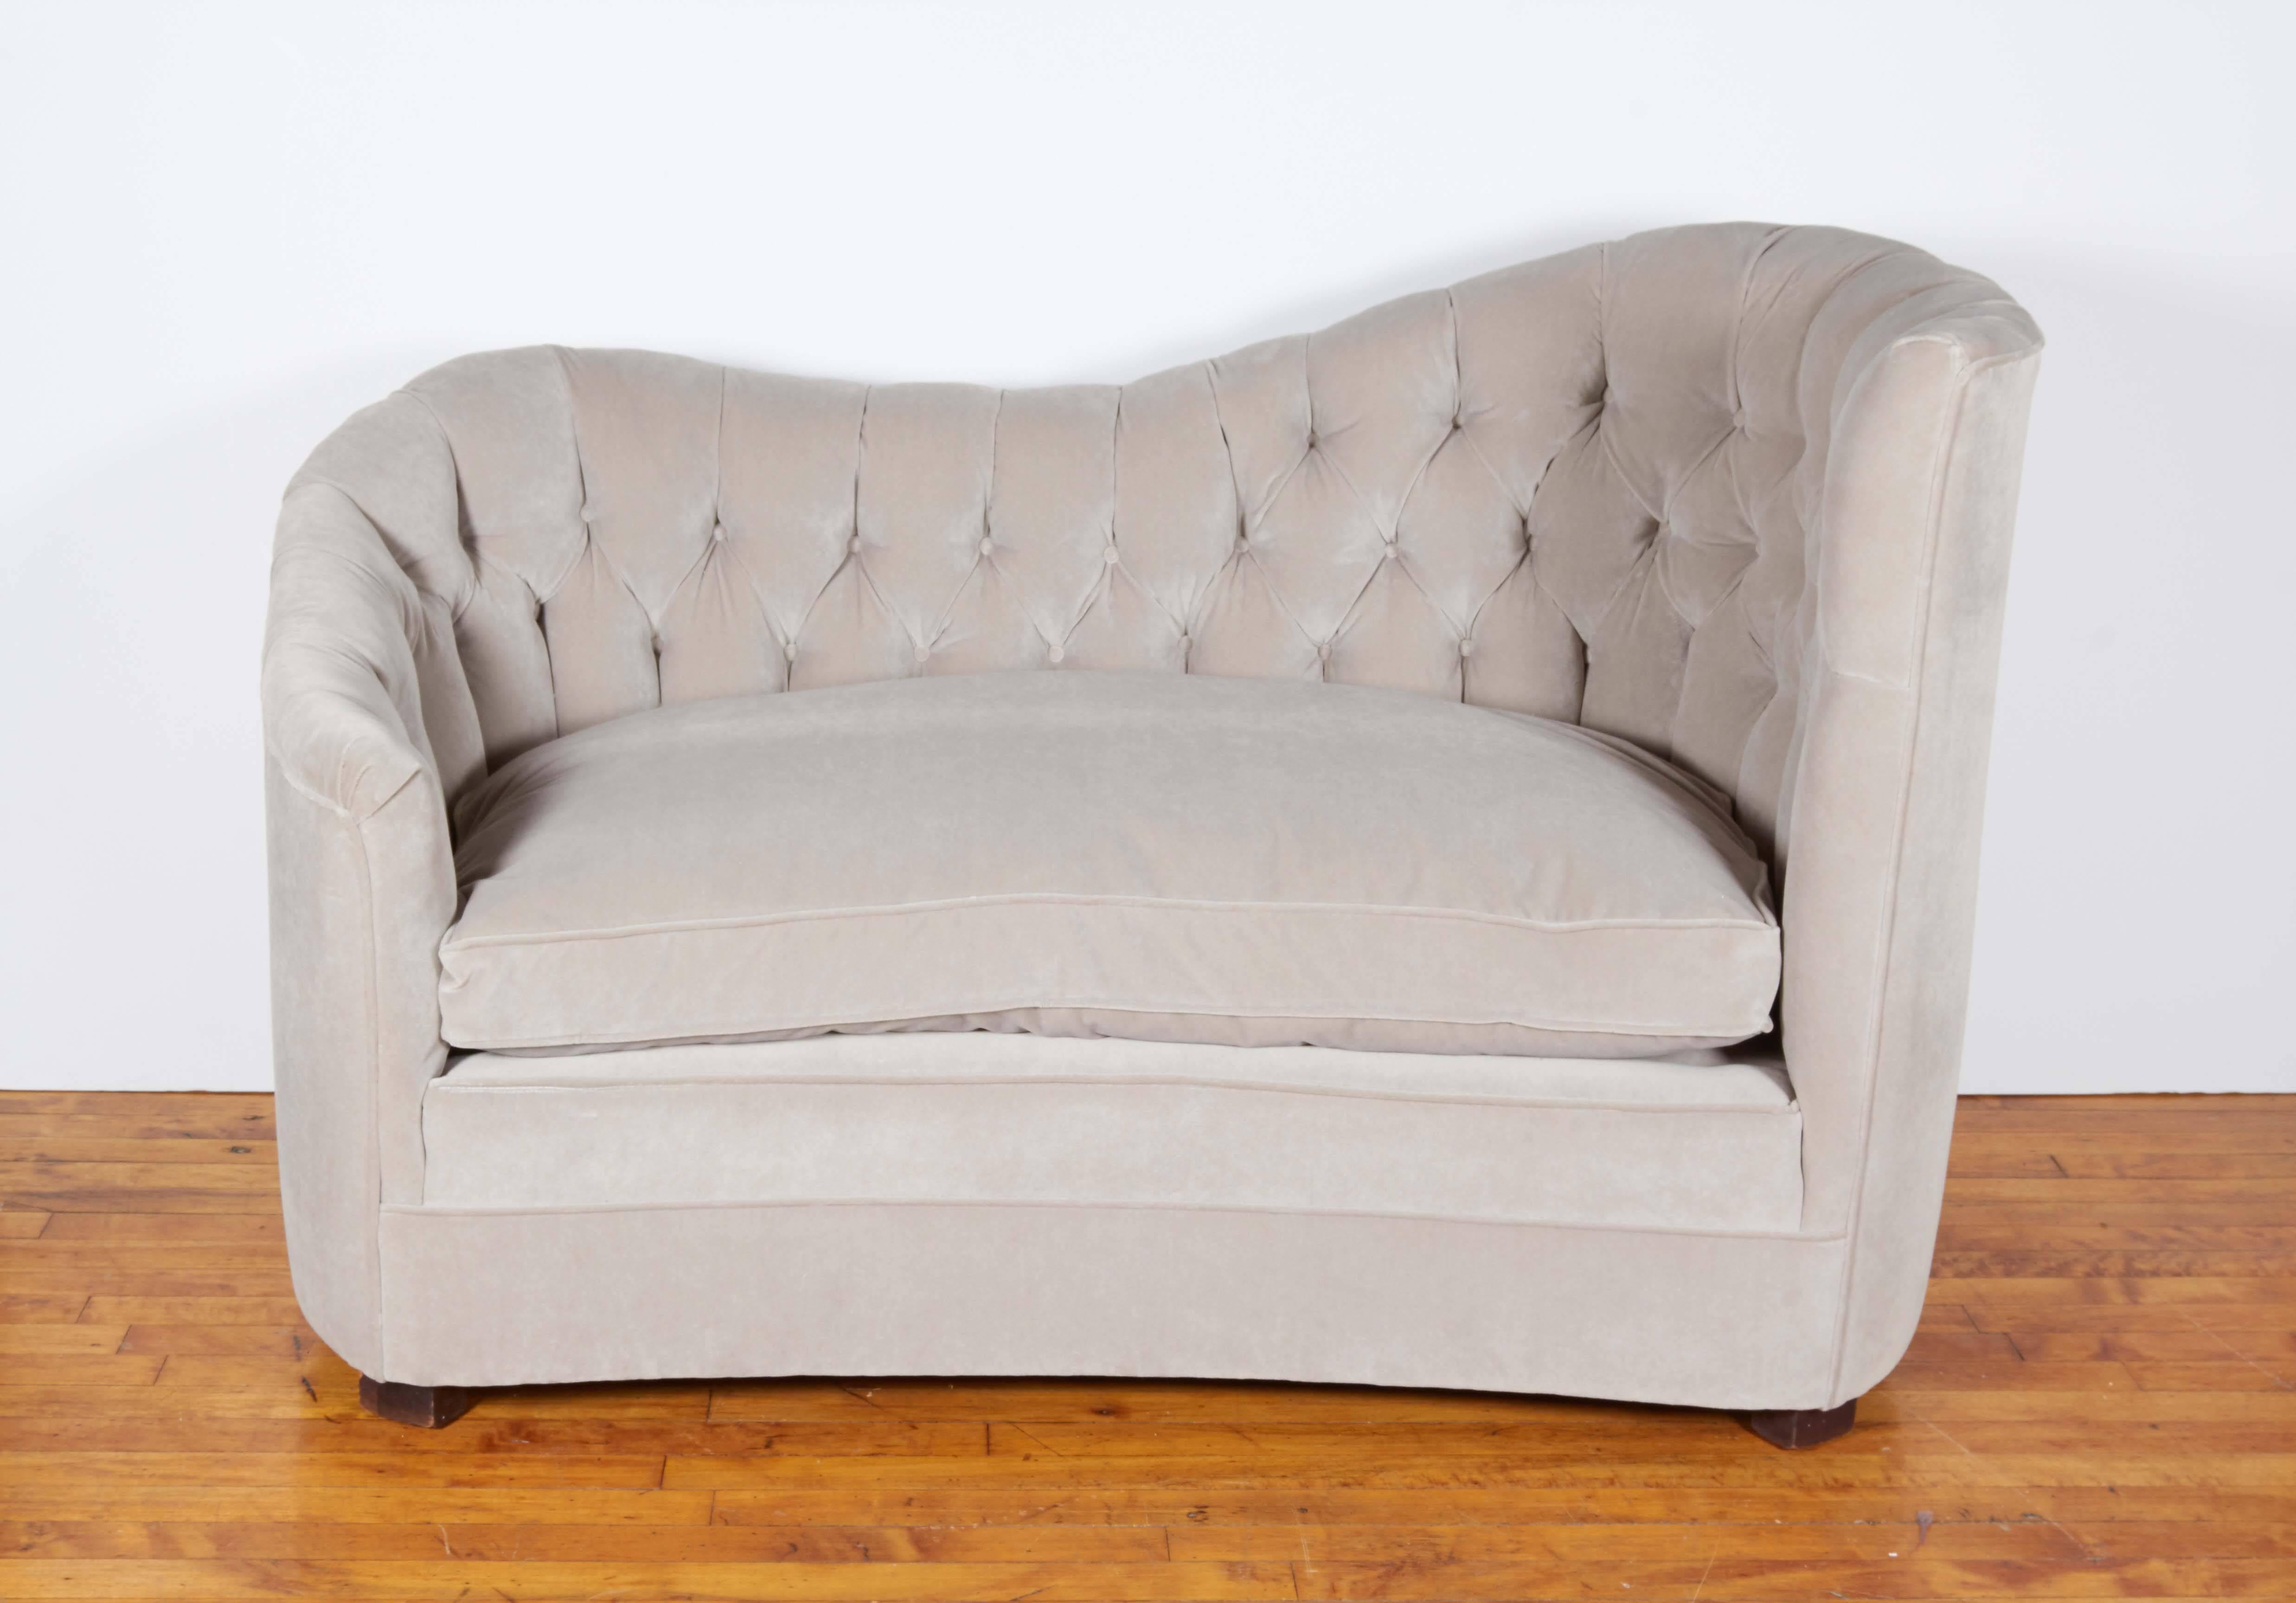 A glamorous pair of French Art Deco settees, manufactured, circa 1930s, each entirely upholstered in gray velvet, with curvaceous tufted backs and down cushions. Excellent vintage condition, newly reupholstered.